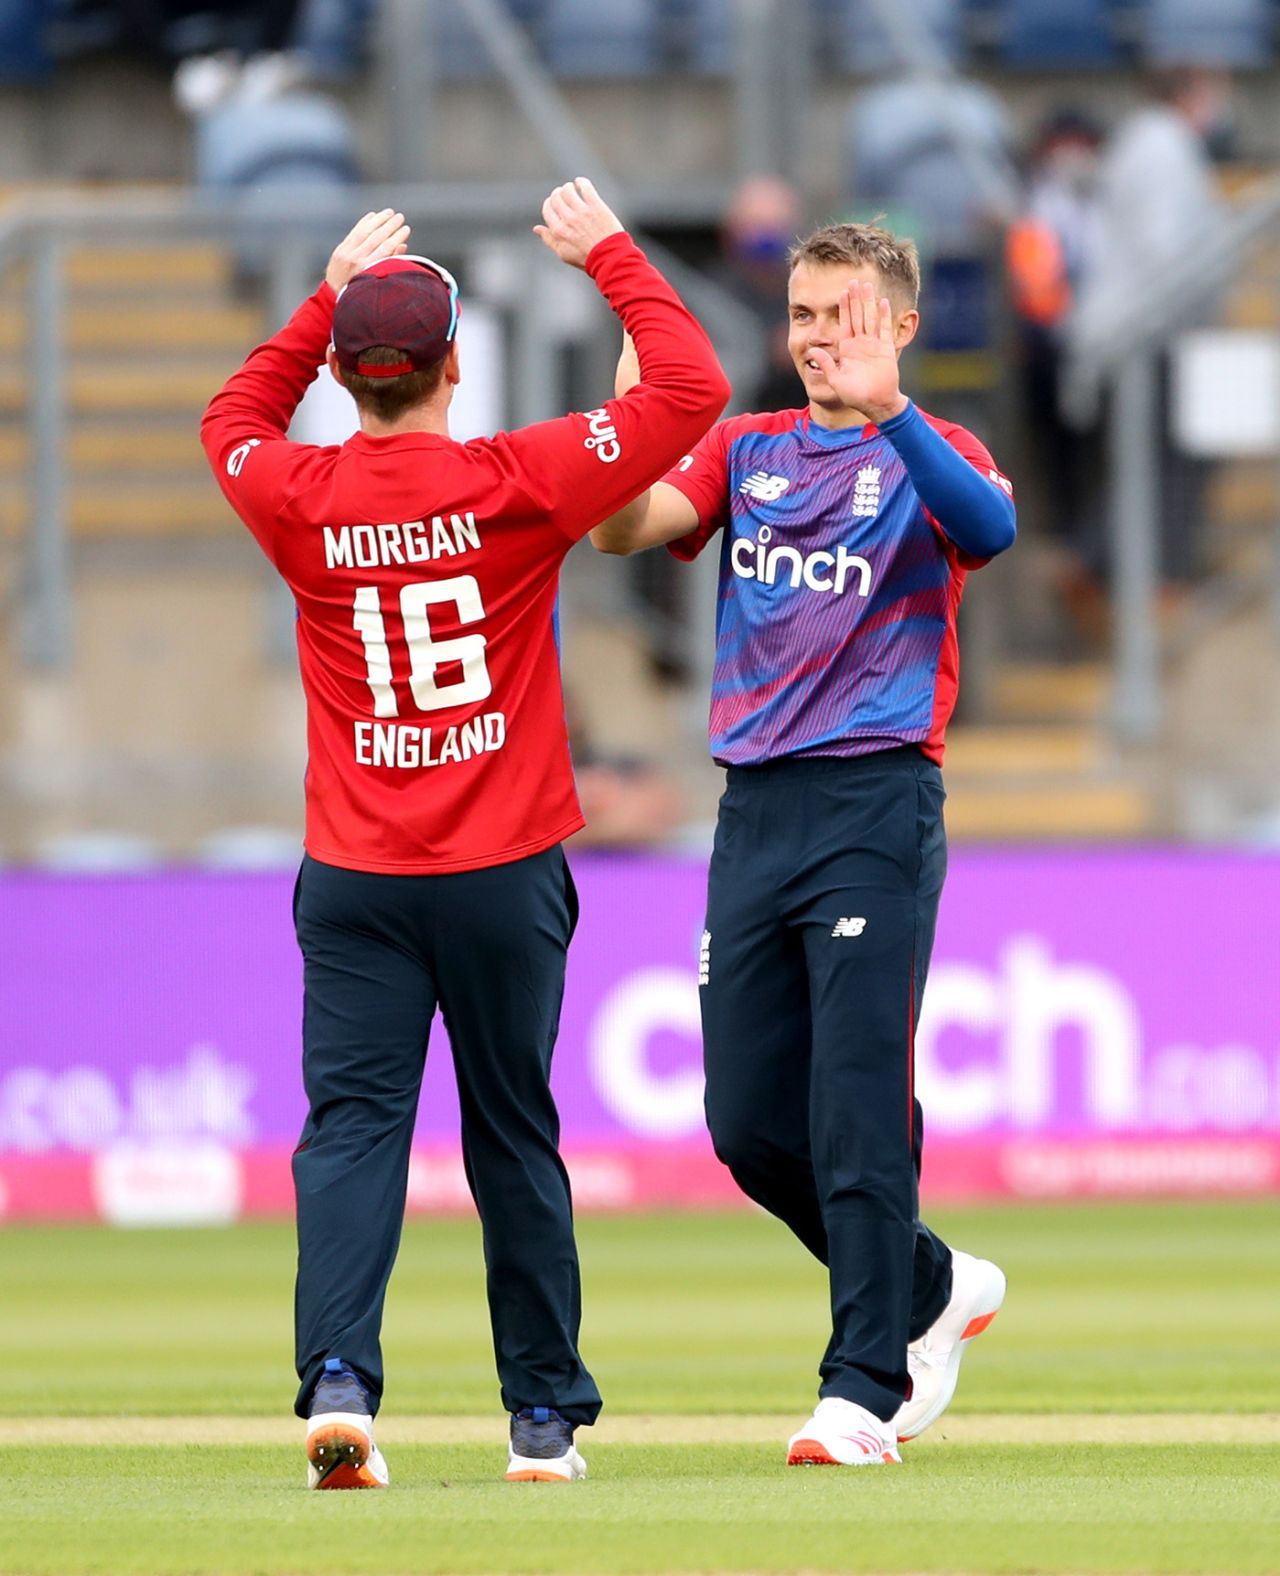 Sam Curran gets a pair of high fives from his captain, England vs Sri Lanka, 1st T20I, Cardiff, June 23, 2021